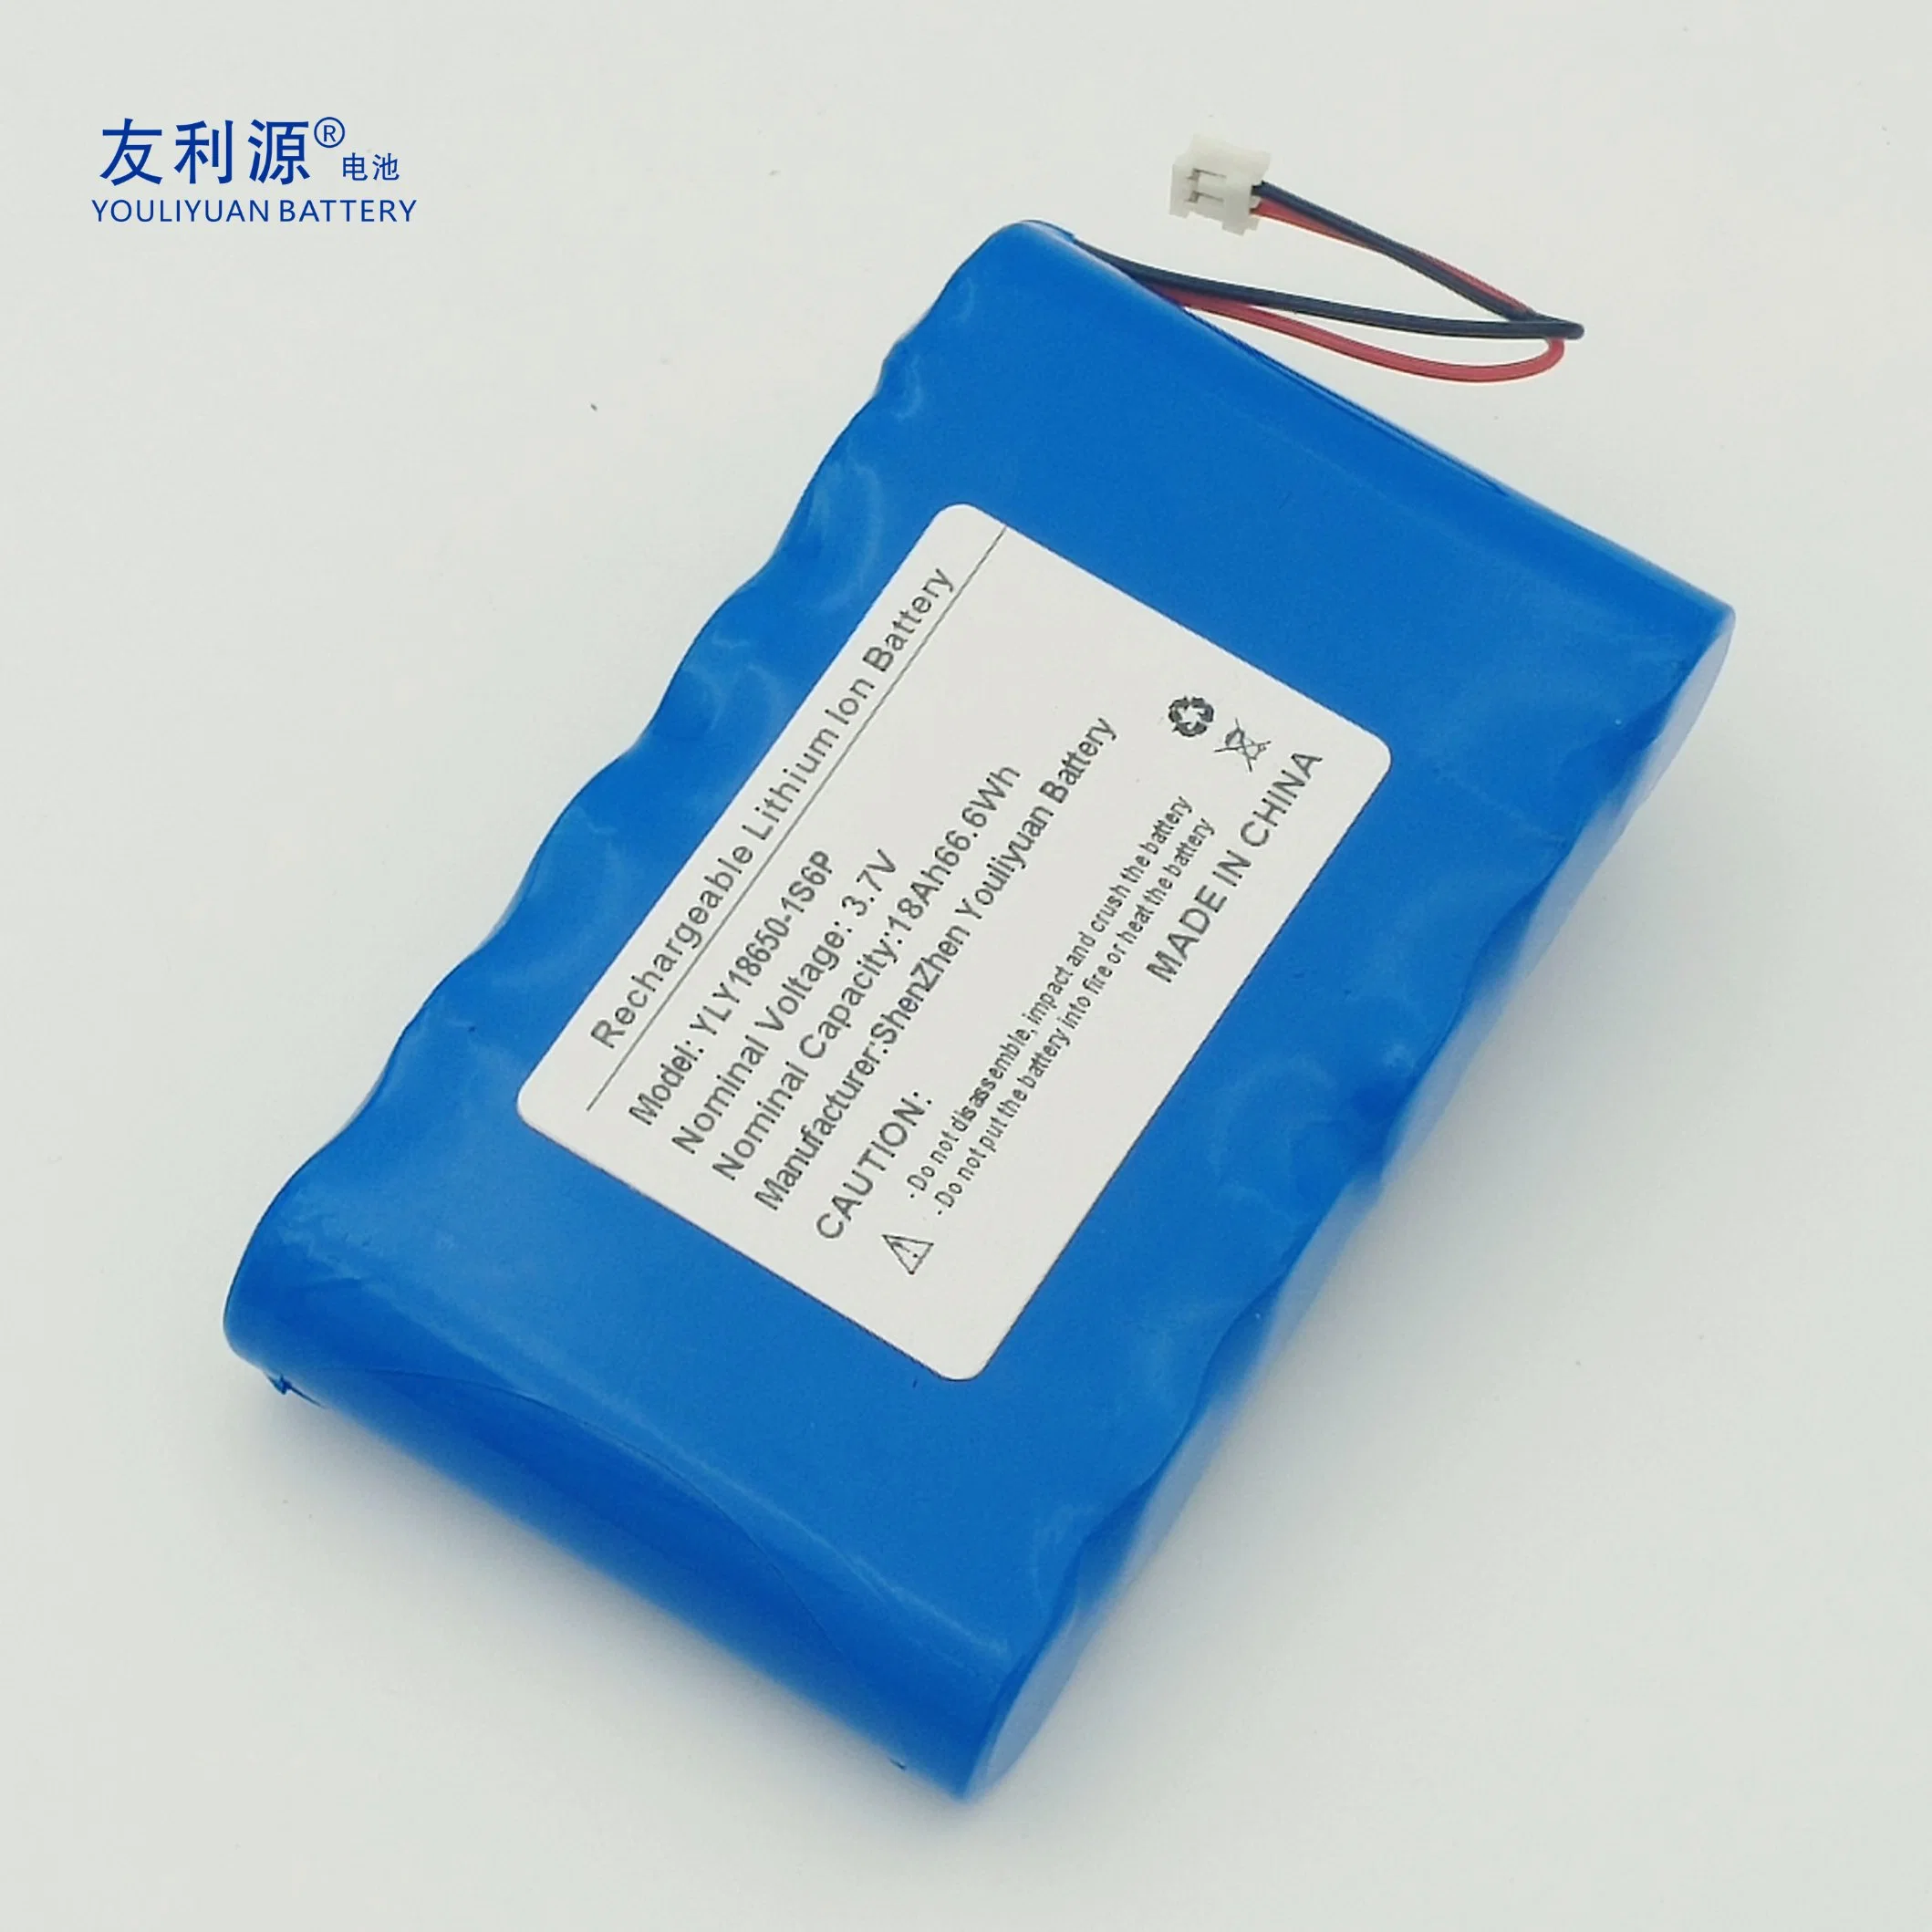 18650 Lithium Battery 3.7V 16.8ah Street Lights Traffic Lamp Battery Solar Energy Storage Battery Pack UPS Battery with BMS and Connector